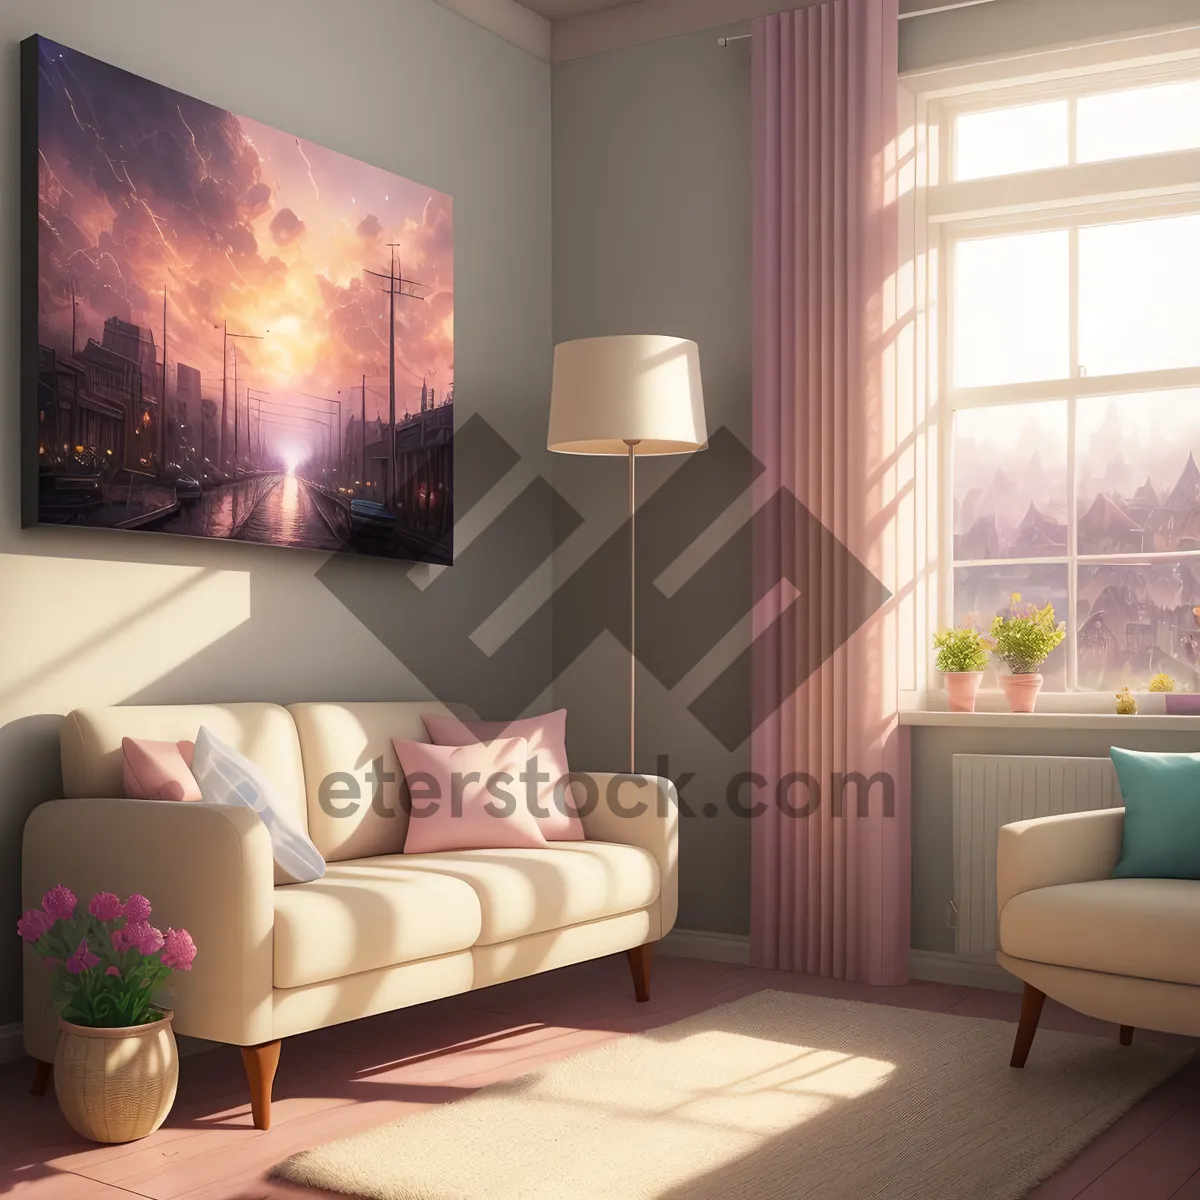 Picture of Modern Luxury Living Room with Comfy Sofa, Stylish Lamp, and Cozy Fireplace